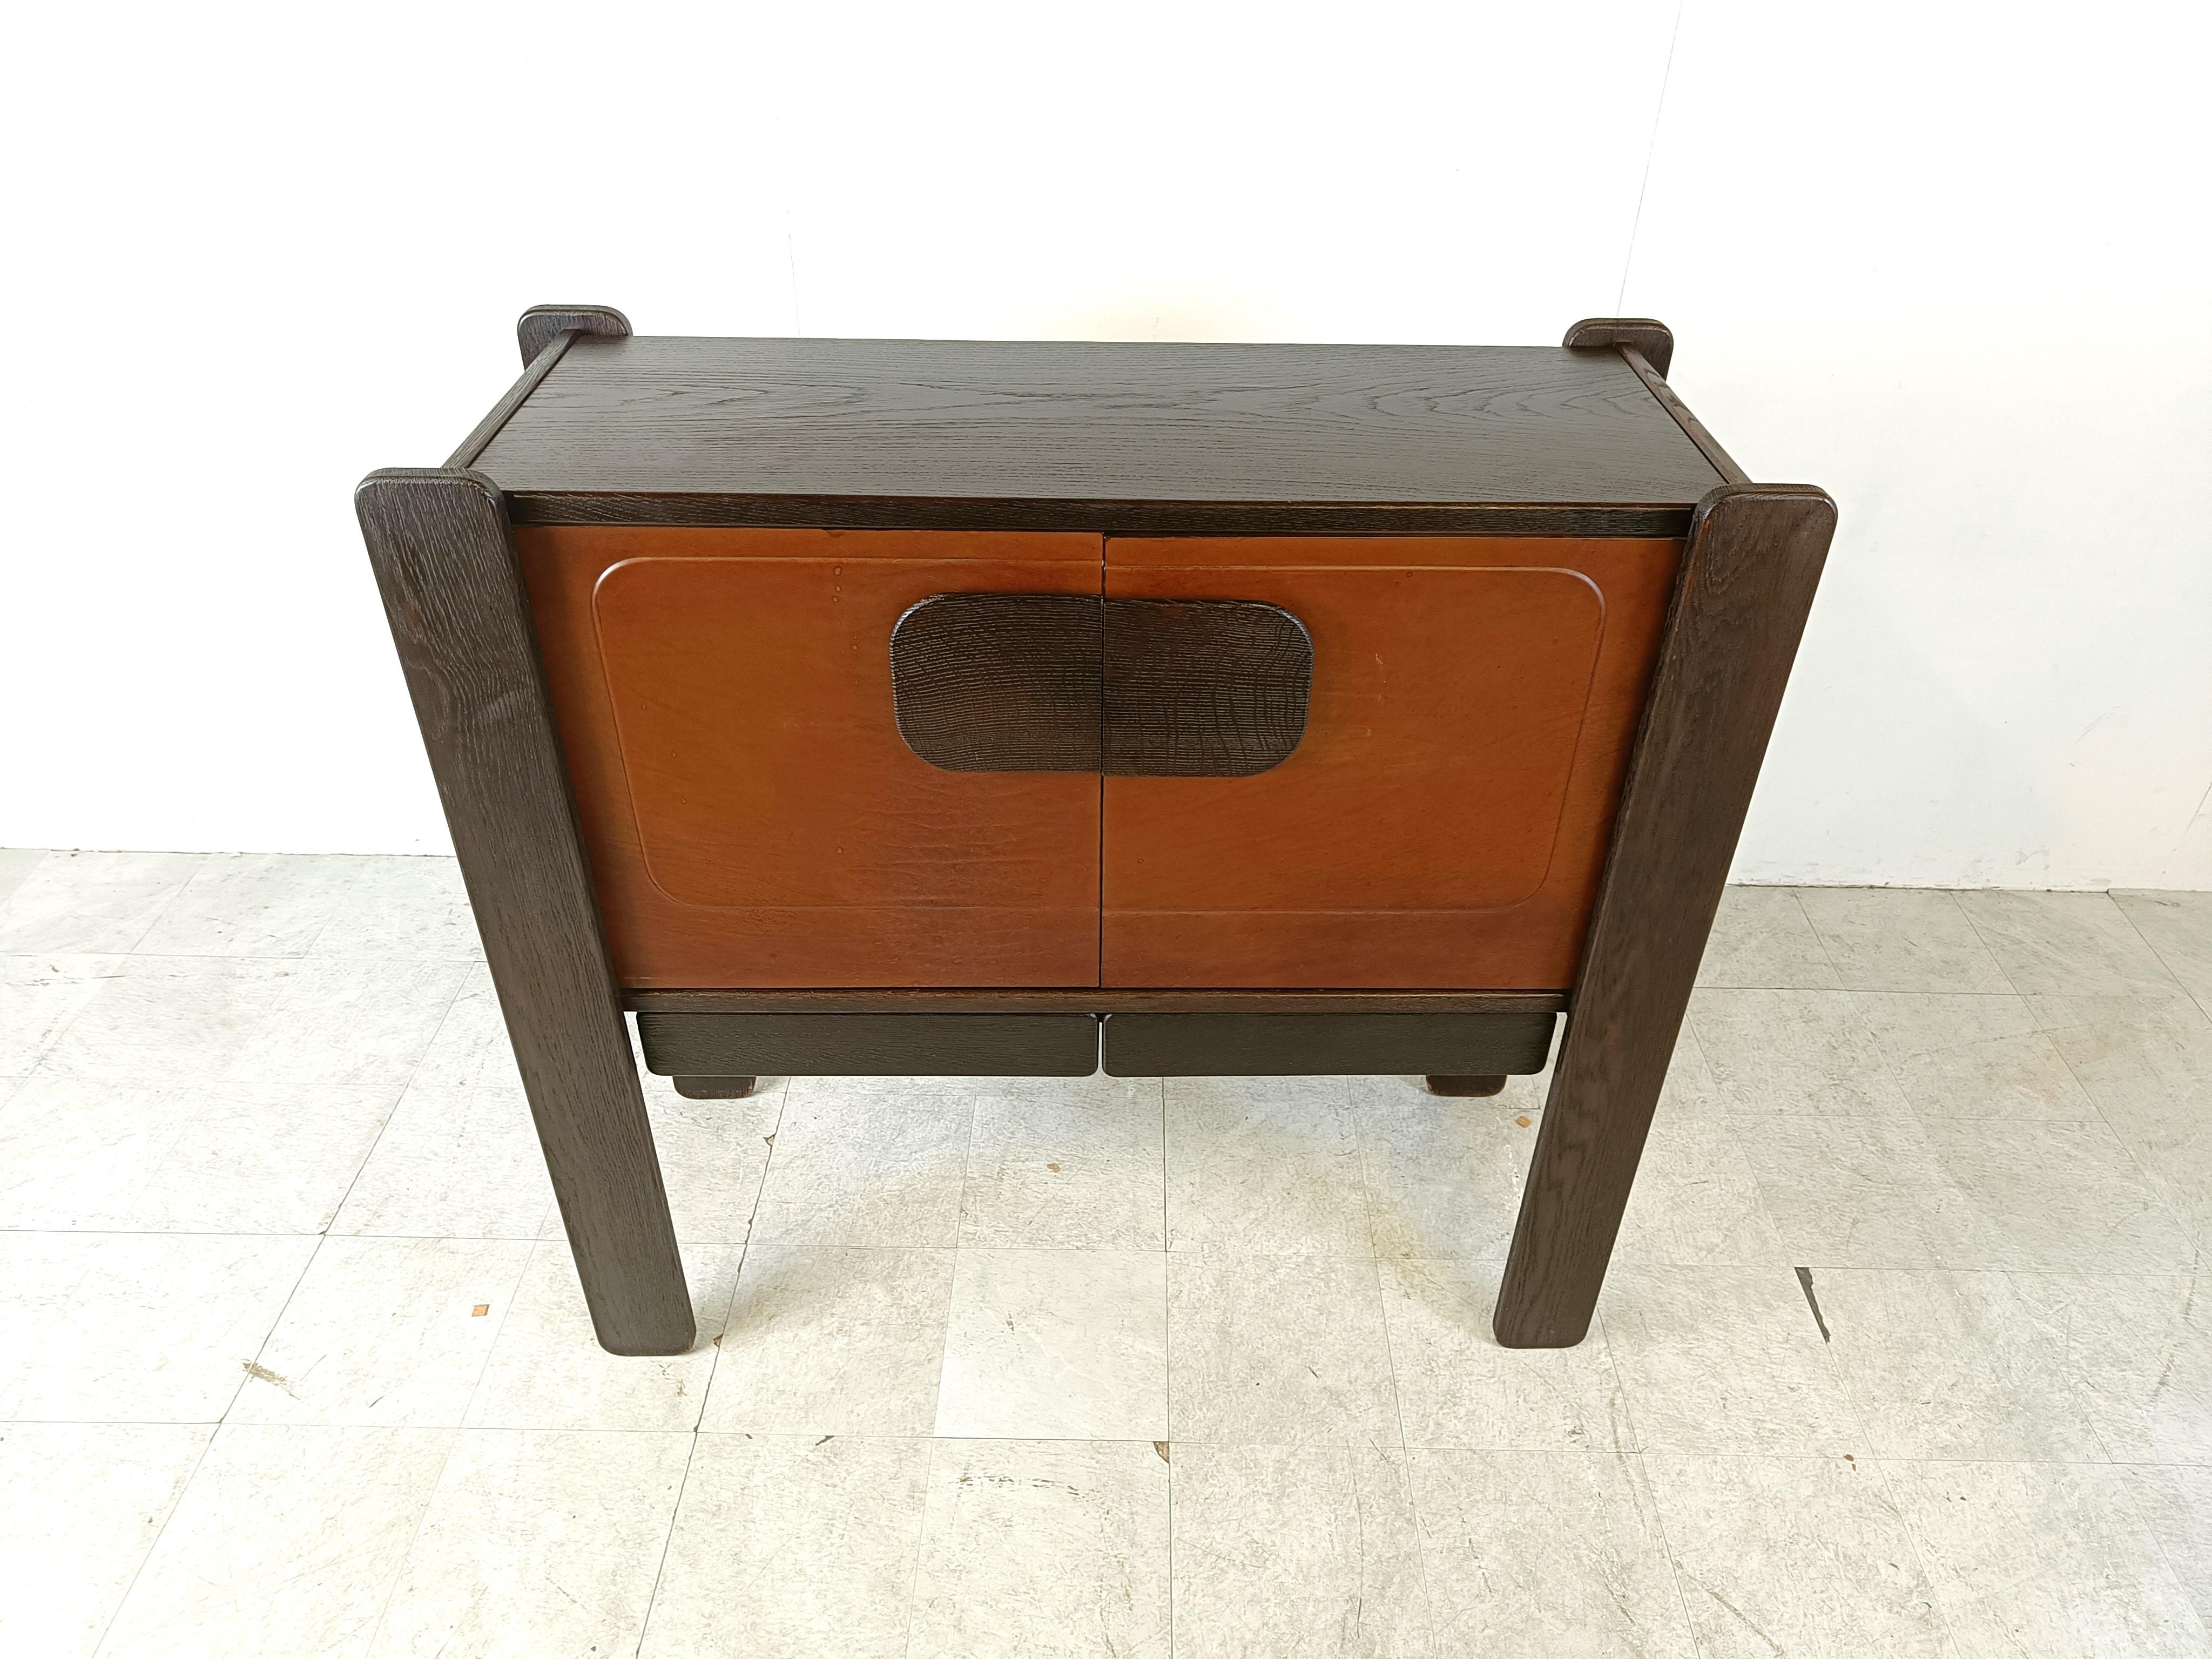 Rare mid century bar cabinet with a wooden frame and leather panels manufactured by Belgian furniture company hi plan.

The cabinet has two doors and two drawers.

Beautiful and very high quality mid century design cabinet/

1960s - Belgium

Very